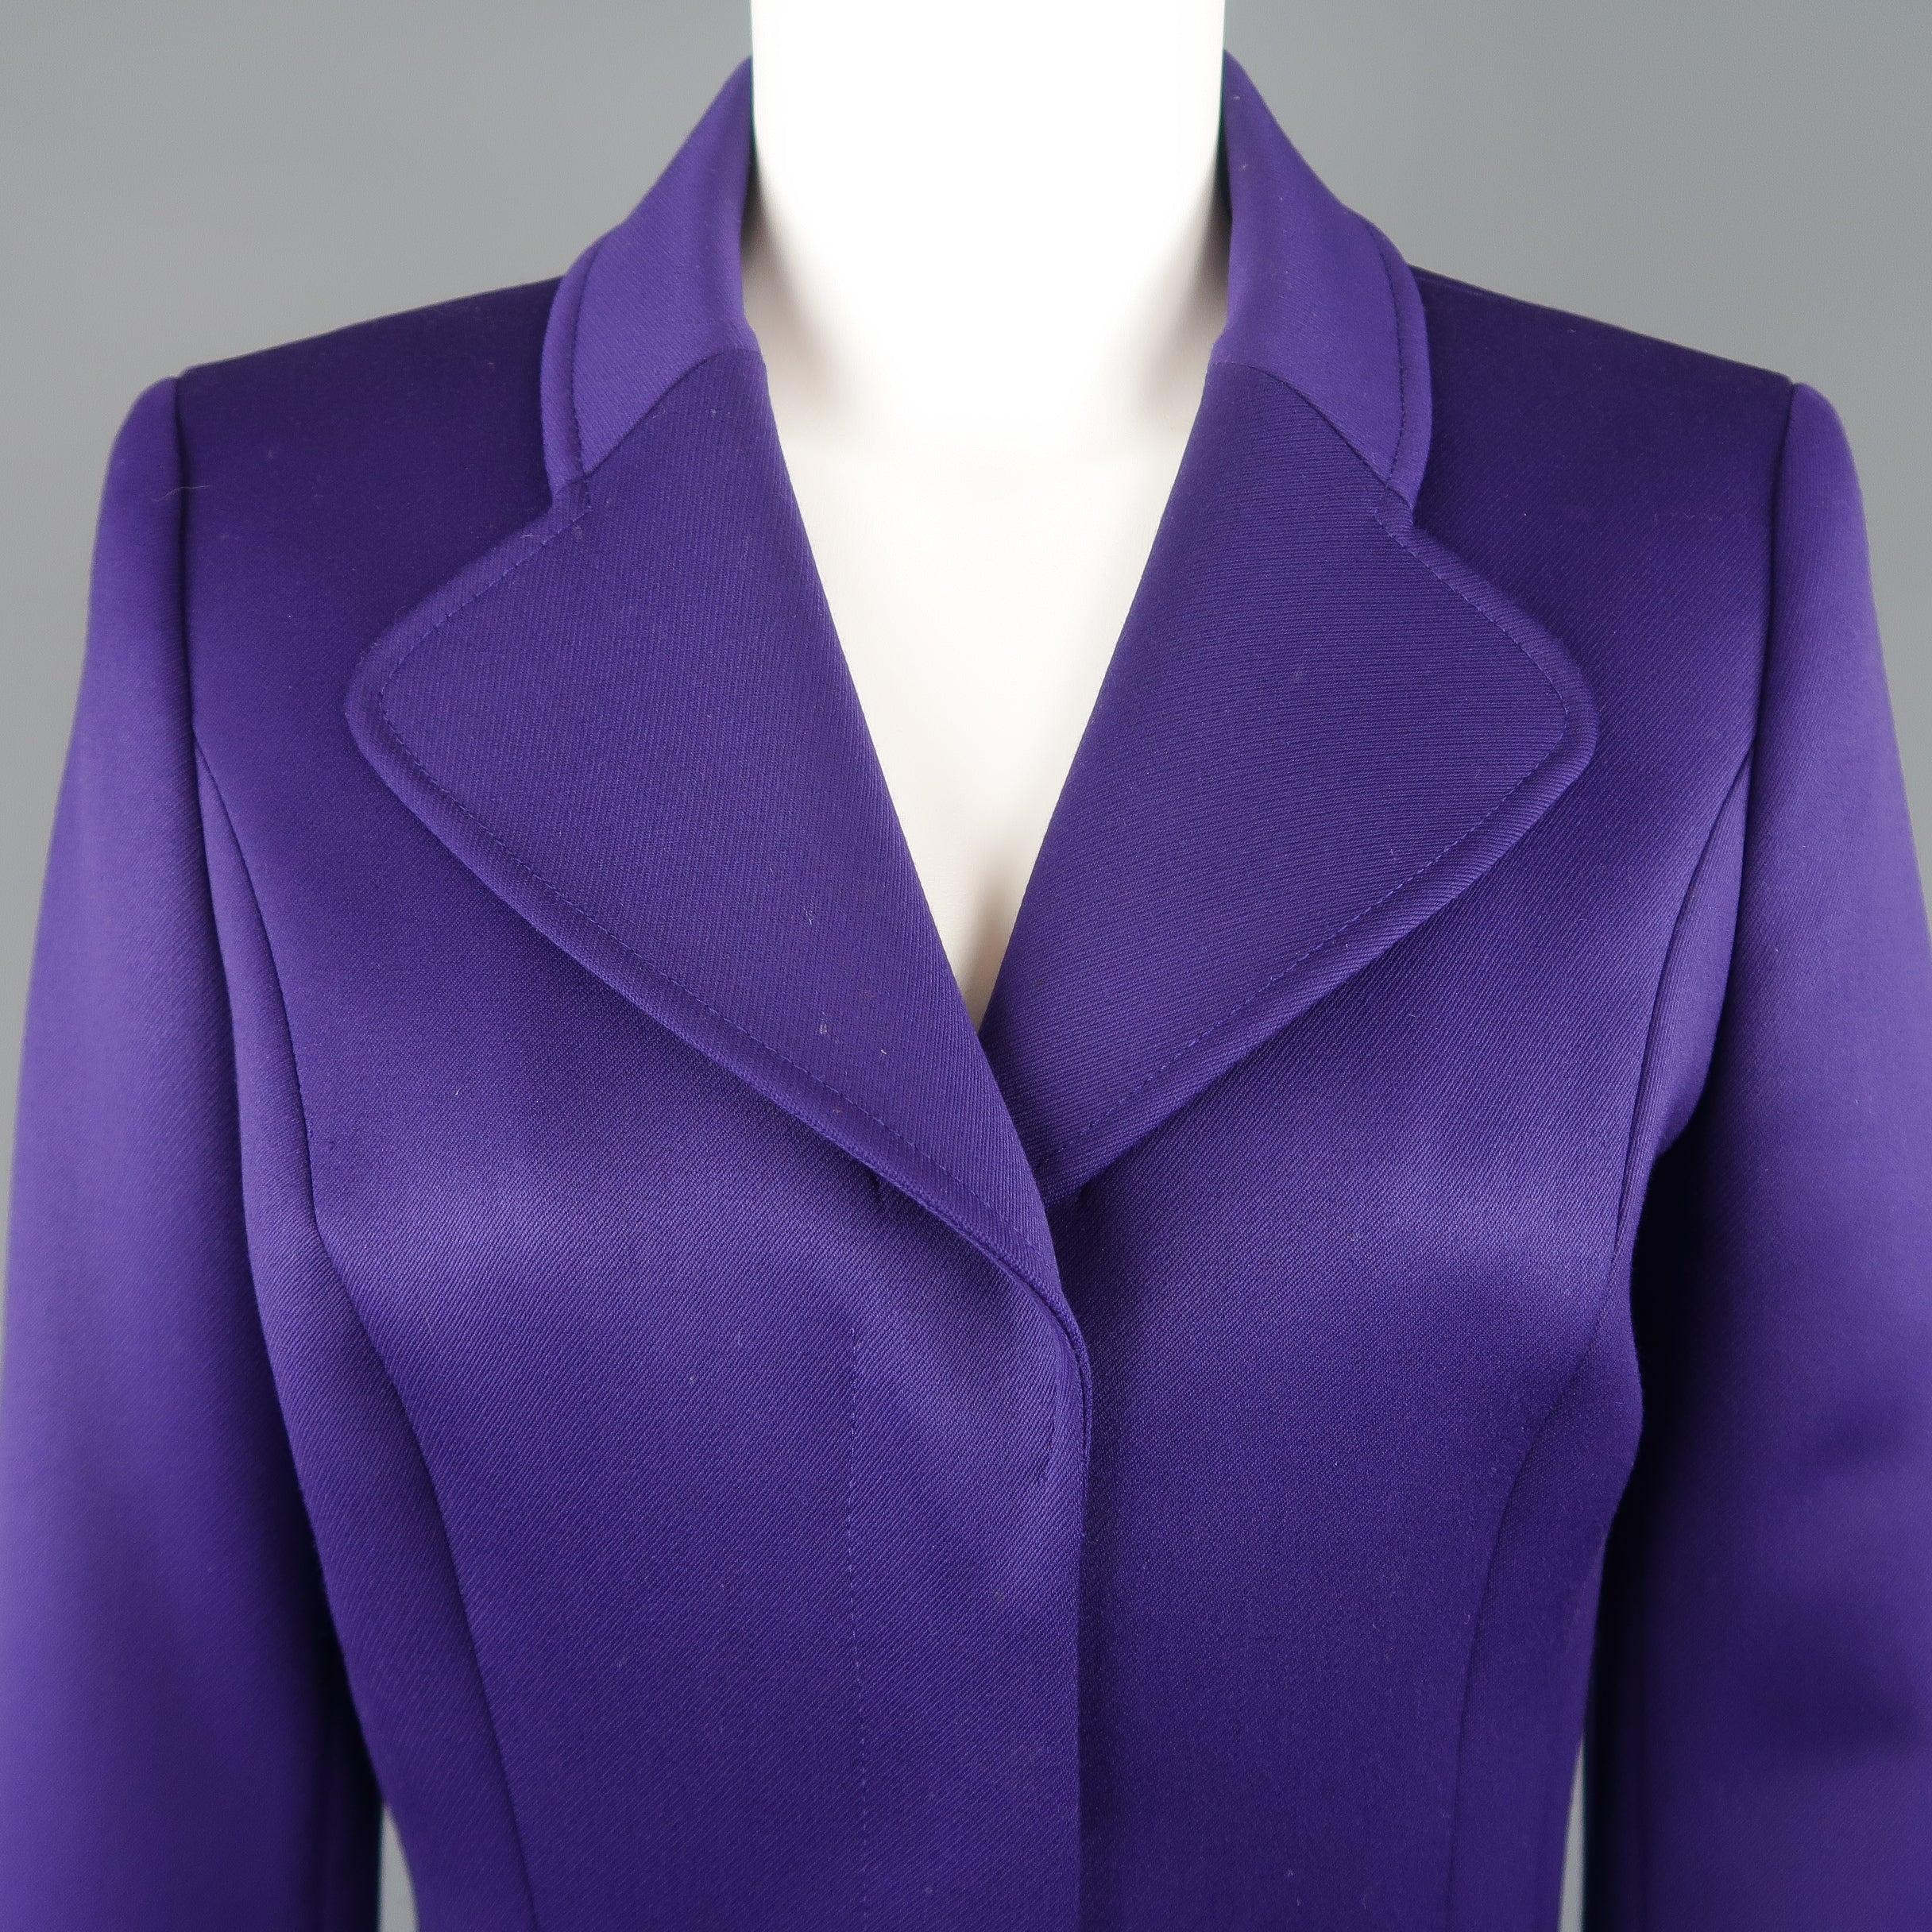 ESCADA cropped sport jacket comes in purple wool blend twill with a pointed lapel, hidden snap closures, and belted waist. 
 Excellent Pre-Owned Condition.
  
 

 Marked:  DE 34
  
 

 Measurements: 
  
 l Shoulder: 15 inches 
 l Bust: 38 inches 
 l